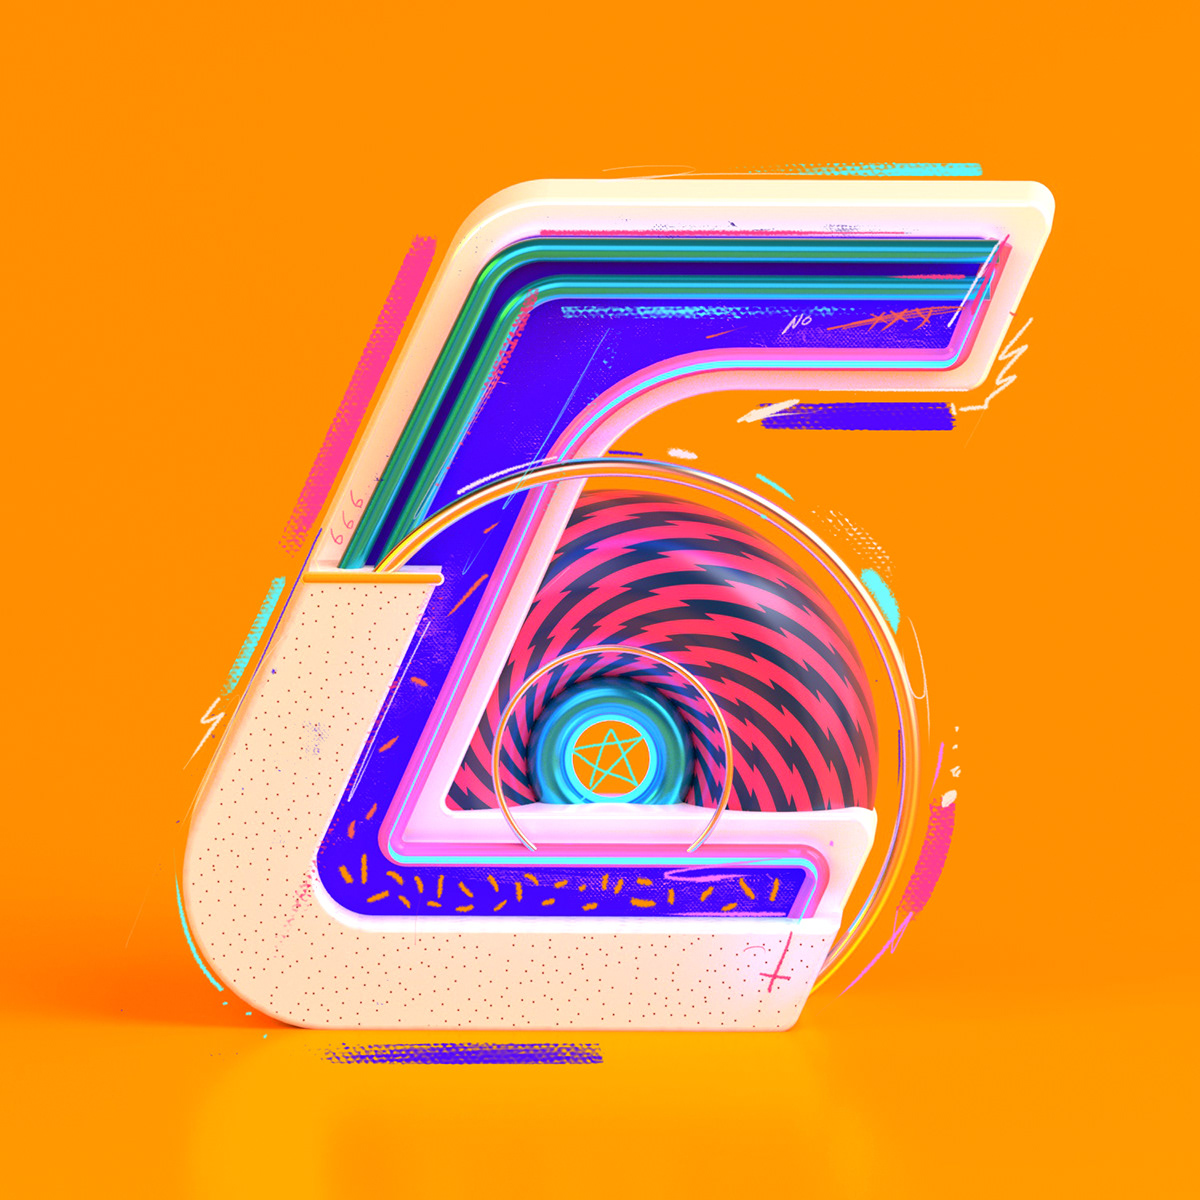 36daysoftype font 36days 3DType 3D grunge punk Gaming color Fun